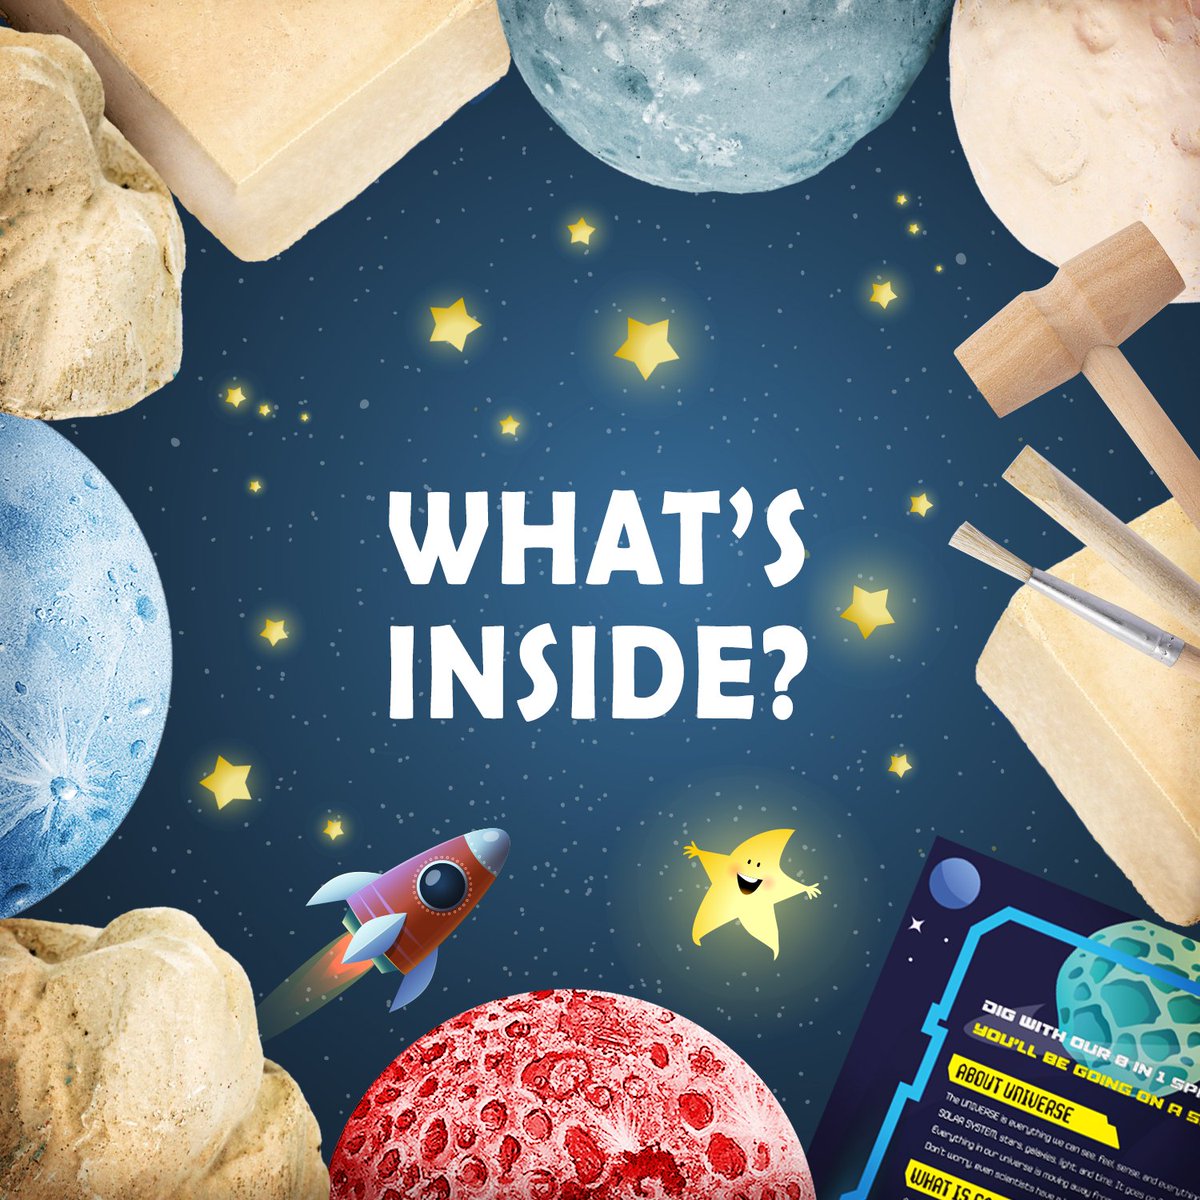 Be a Mad Explorer!! Start a journey of excavating our solar system and moon! 

#STEM  #STEMeducation #stemtoys #solarsytem #solarsystemtoys #toys